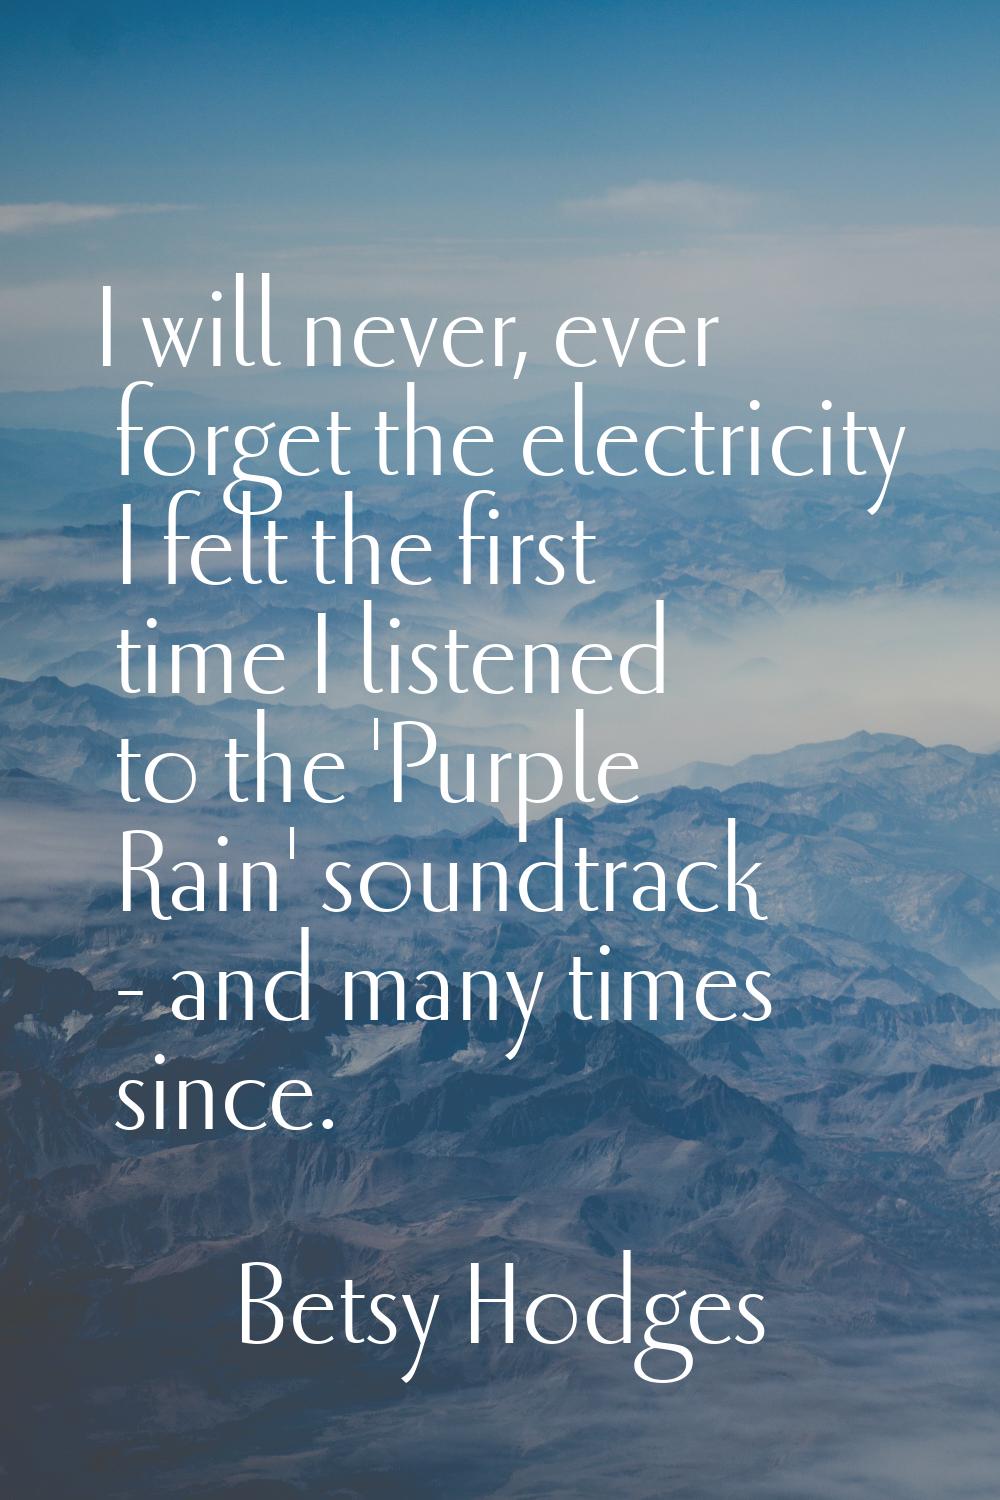 I will never, ever forget the electricity I felt the first time I listened to the 'Purple Rain' sou